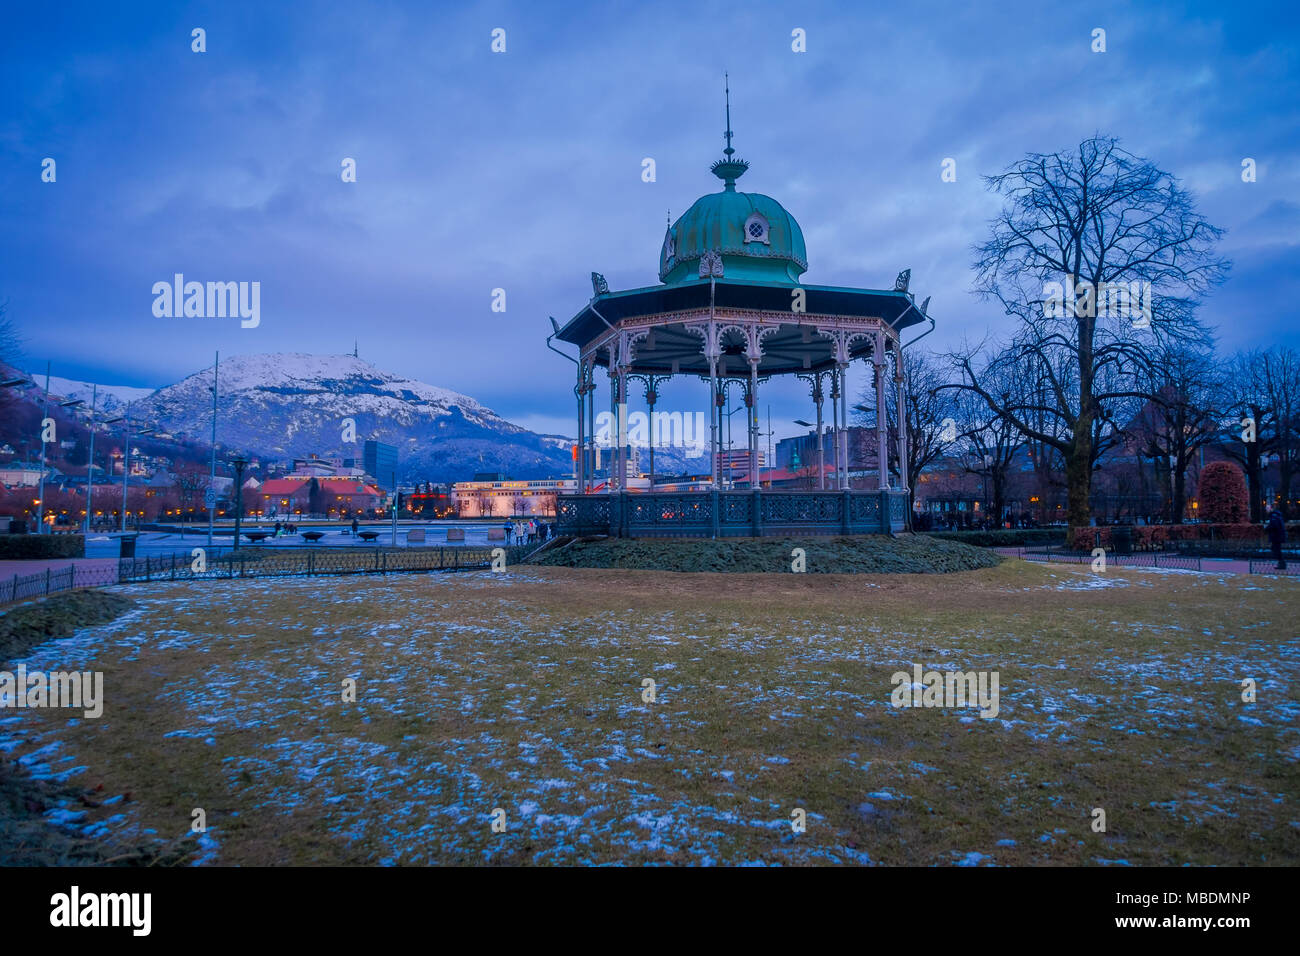 BERGEN, NORWAY - APRIL 03, 2018 Outdoor view of the music pavilion colorful Bergen Byparken gazebo in the city centre Stock Photo